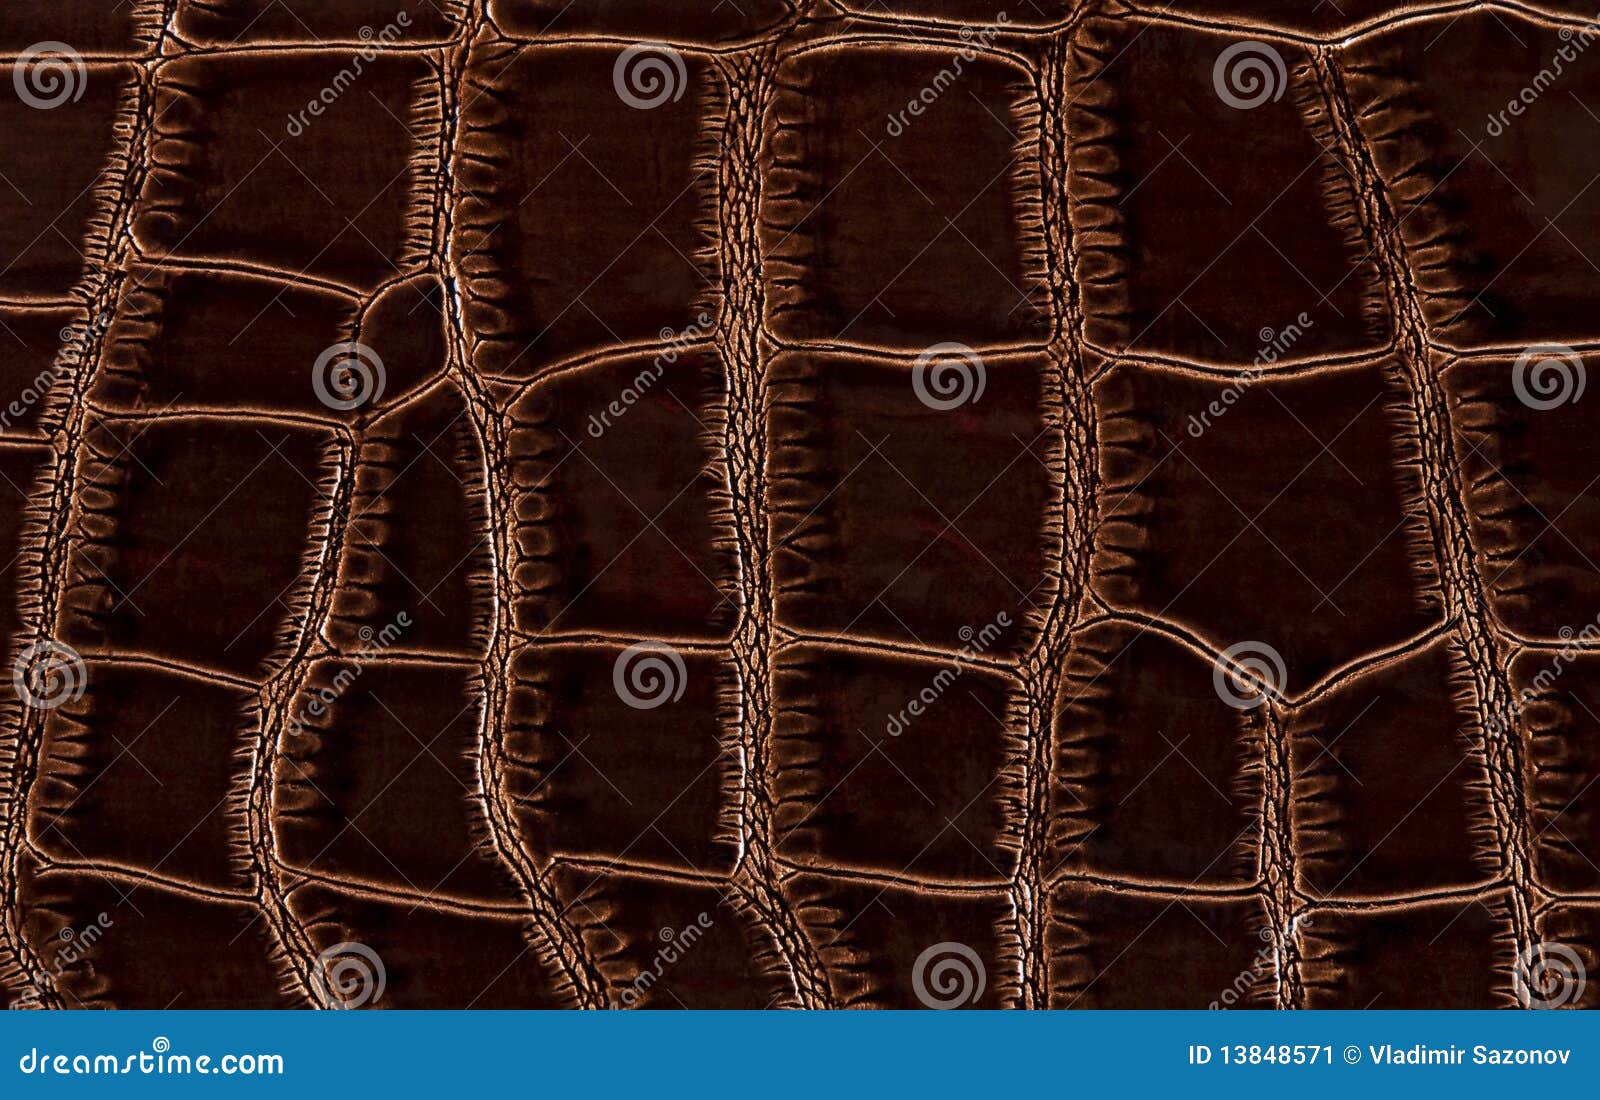 Fake Crocodile Leather Stock Photo, Picture and Royalty Free Image. Image  20332663.